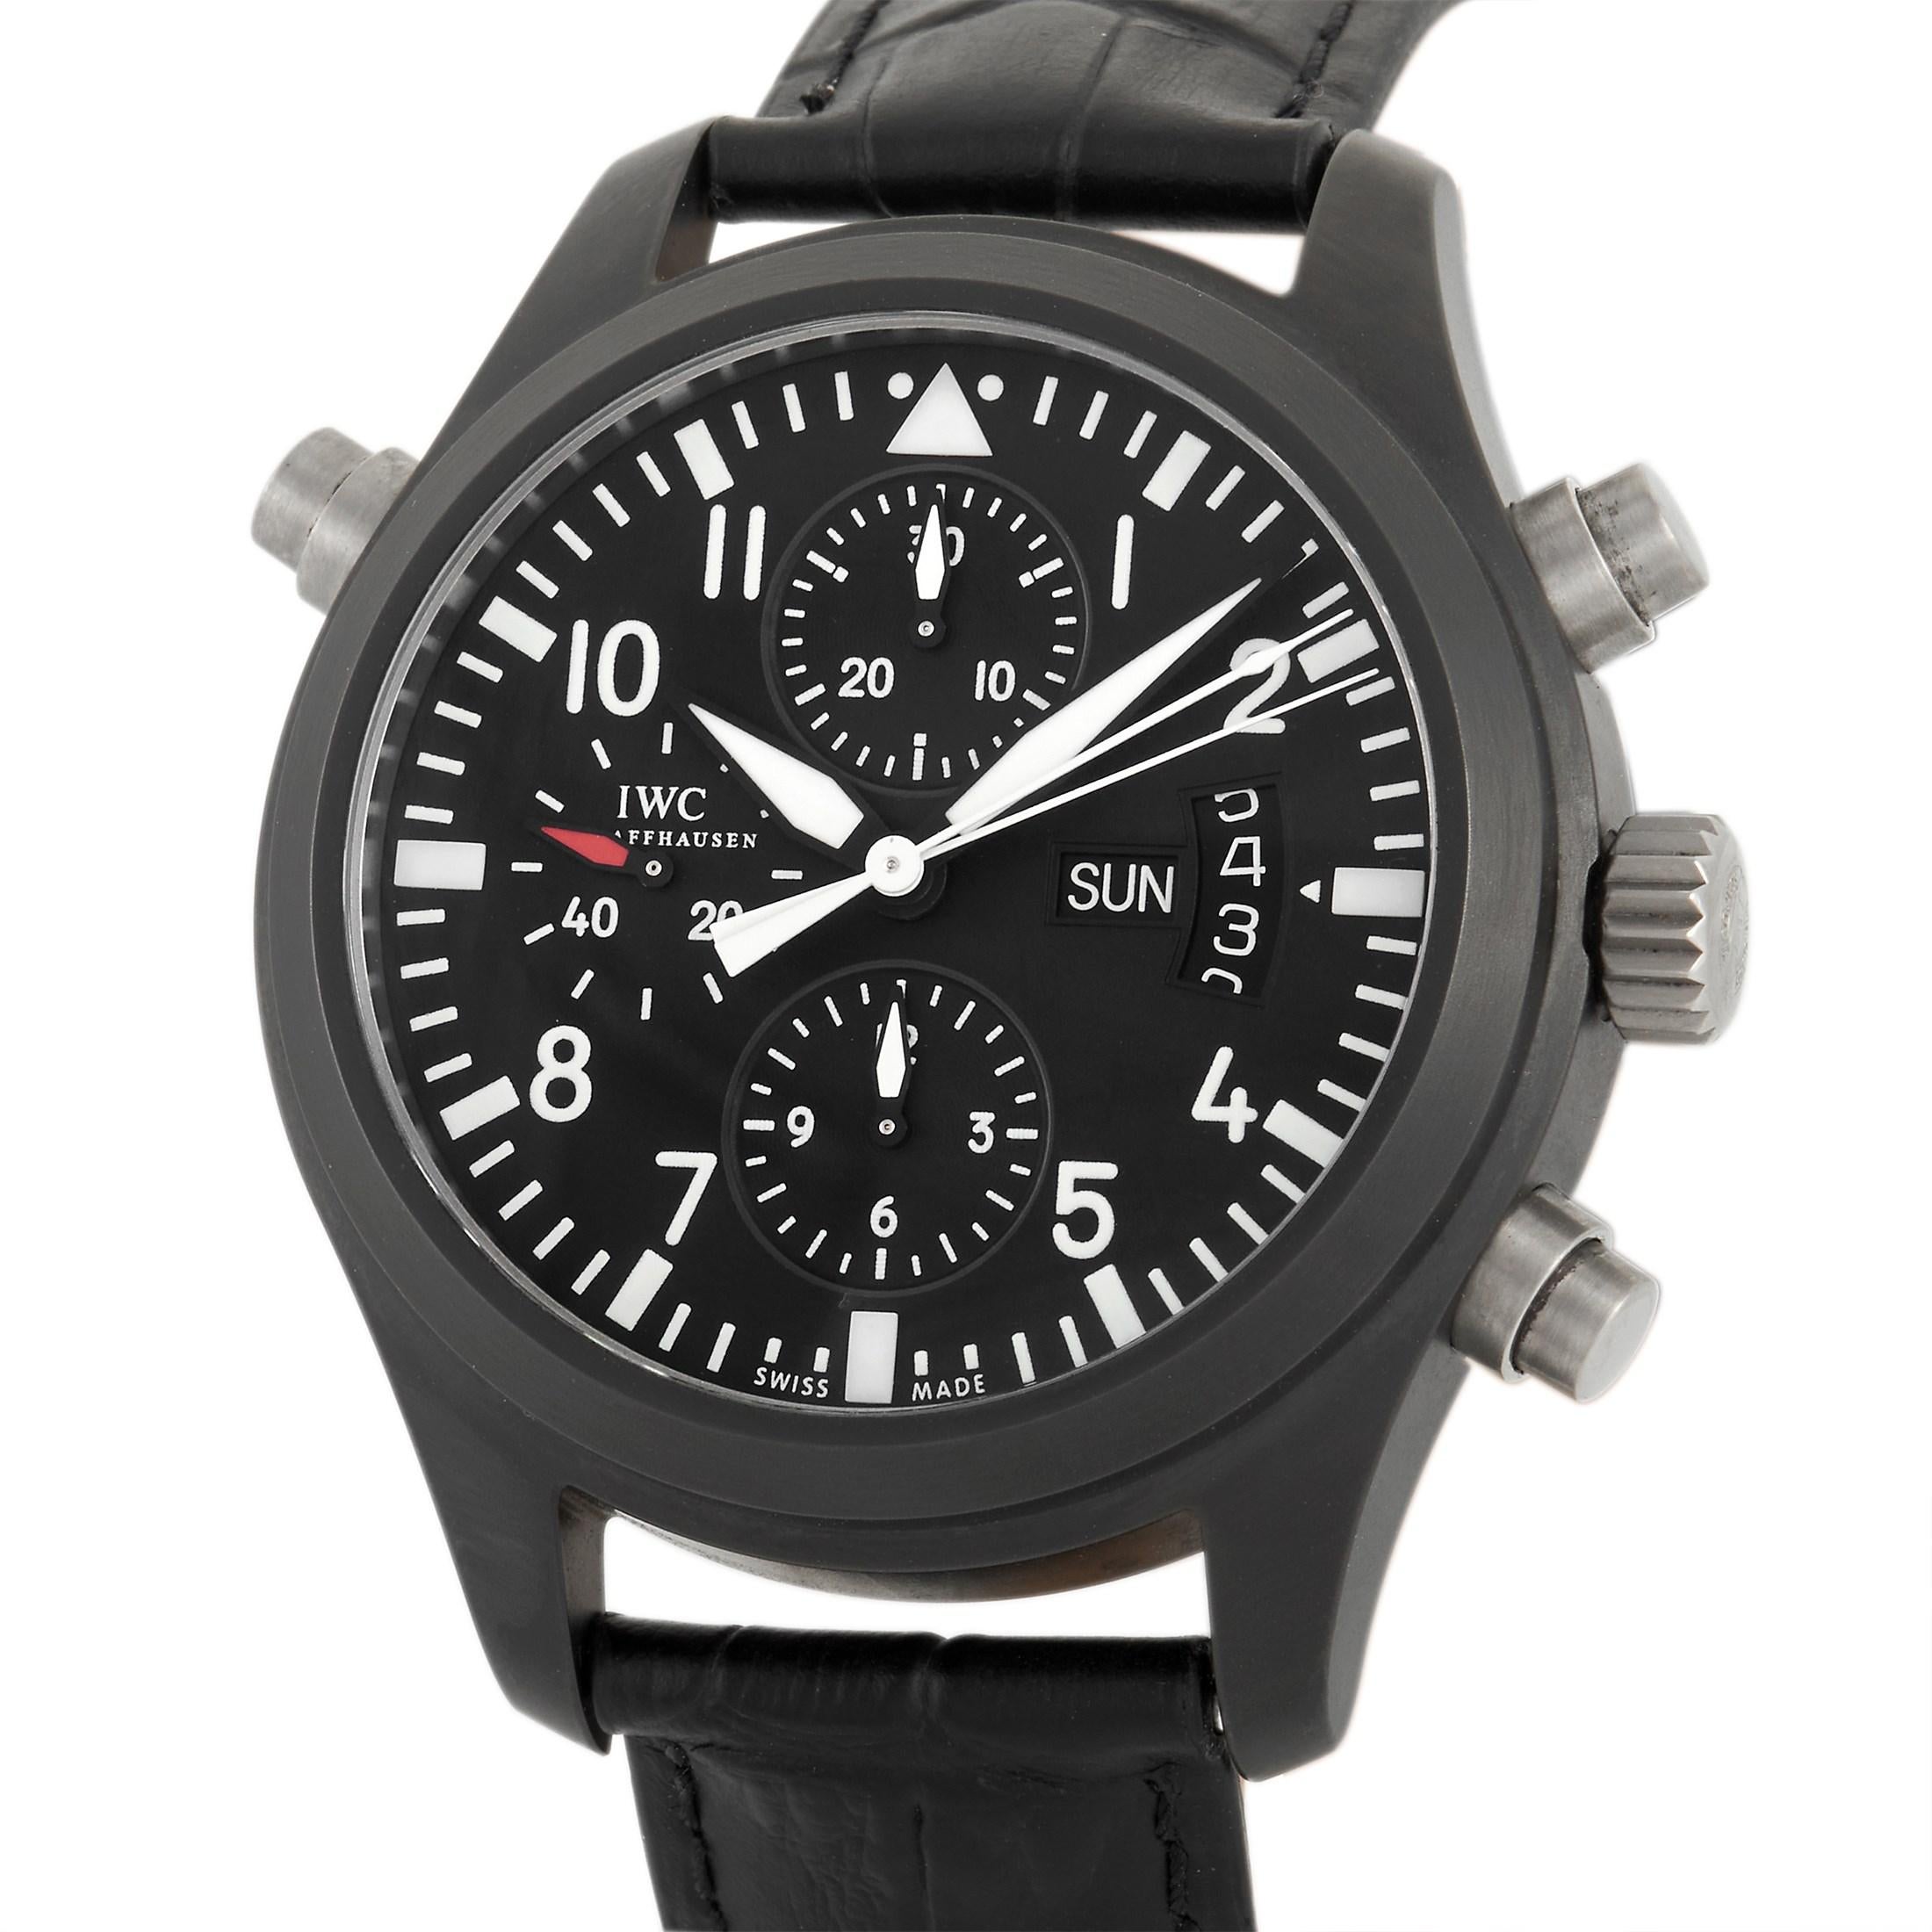 The IWC Pilot's Double Chronograph, reference number IW378601, possesses the power and energy you have come to expect from the iconic luxury brand.

An all-black 44mm case crafted from ceramic pairs beautifully with the black crocodile band. White